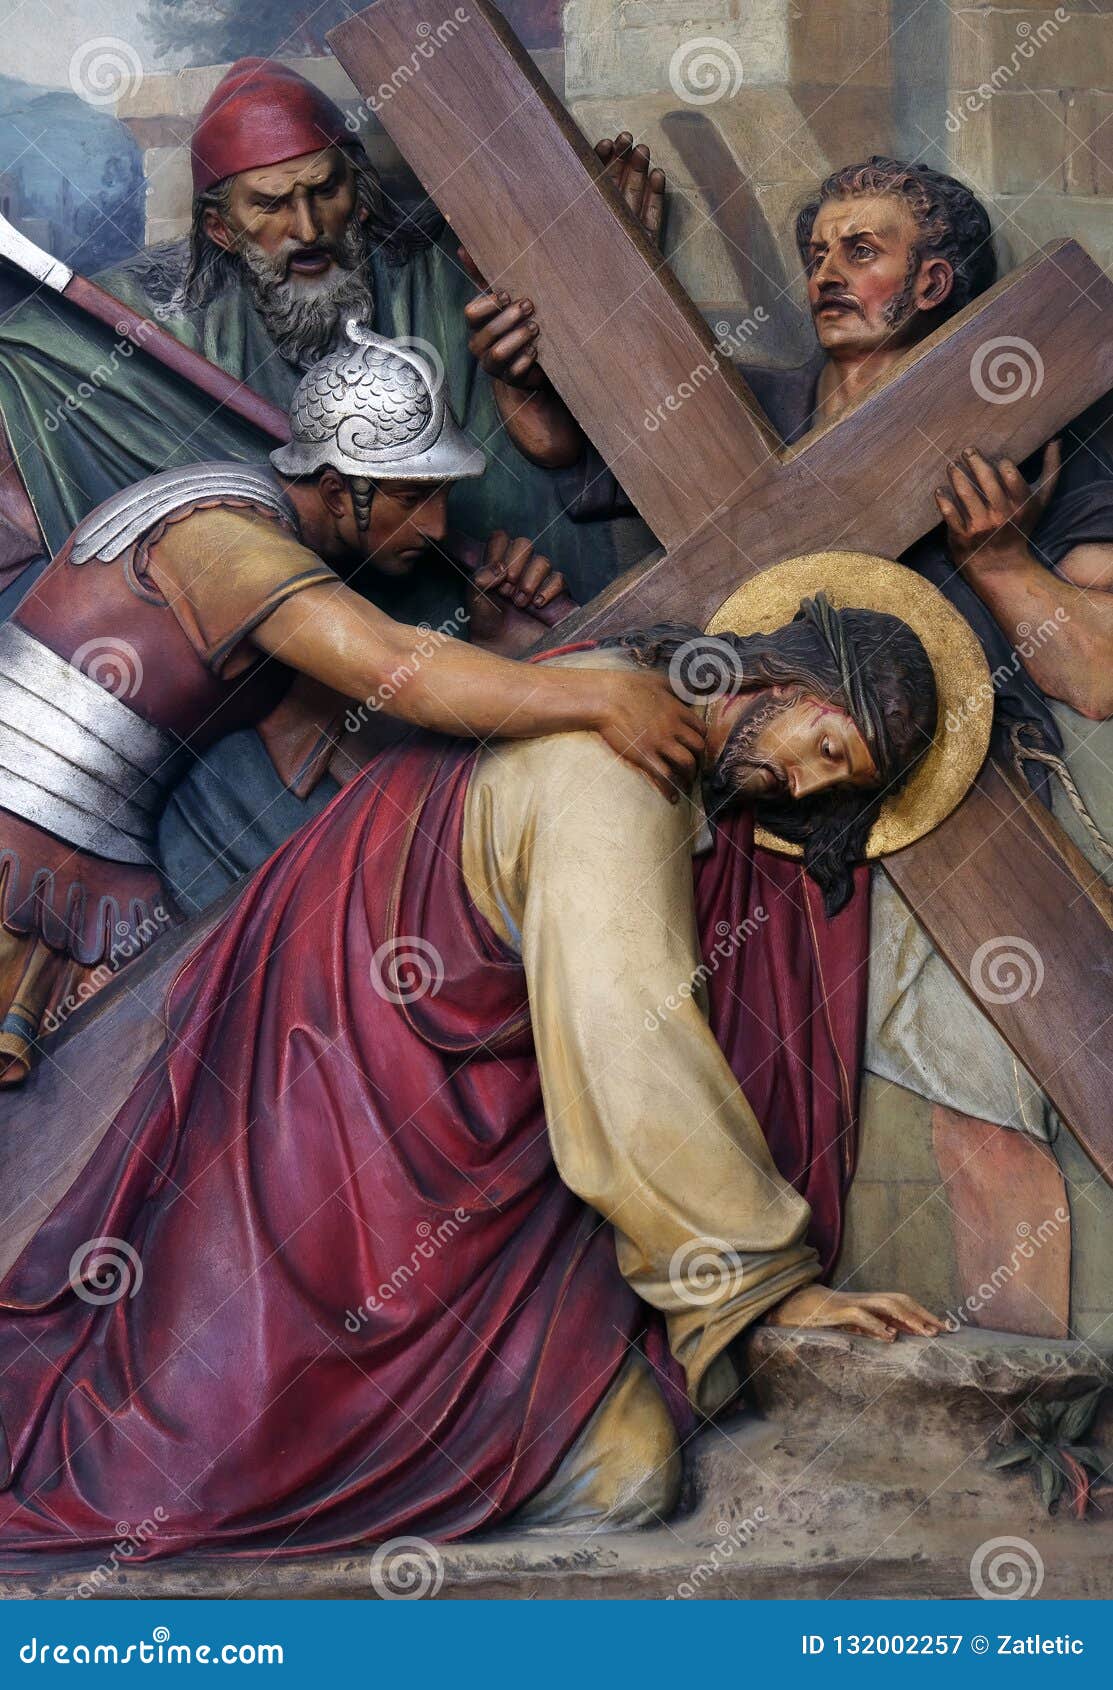 3rd stations of the cross, jesus falls the first time